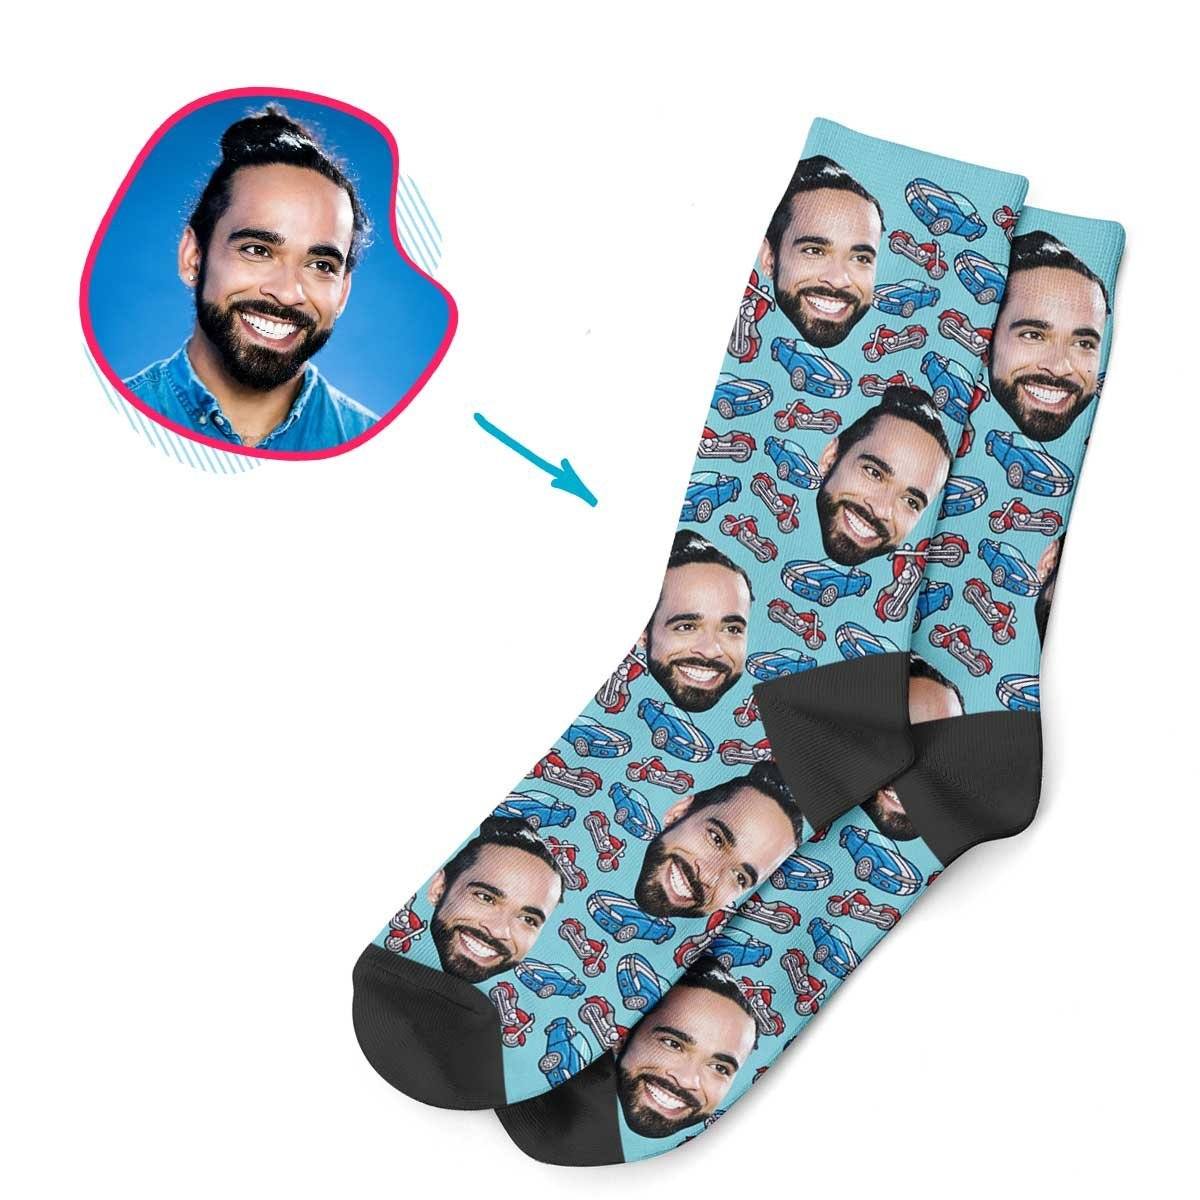 Blue Cars & Motorbikes personalized socks with photo of face printed on them